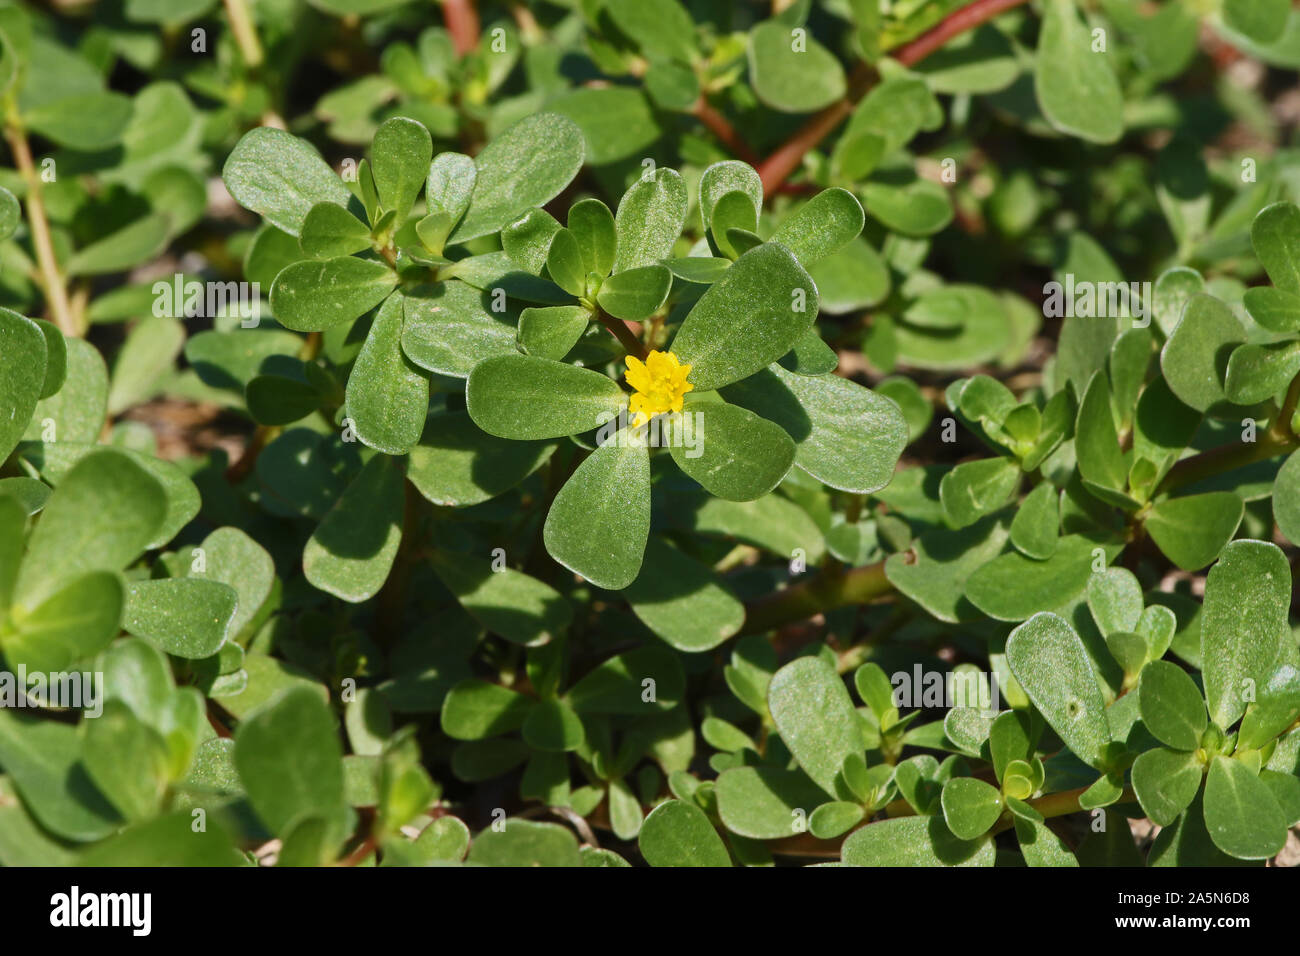 portulaca flower a close relative of common purslane also called pursley, verdolaga, red root or pigweed Latin portulaca oleracea an edible vegetable Stock Photo